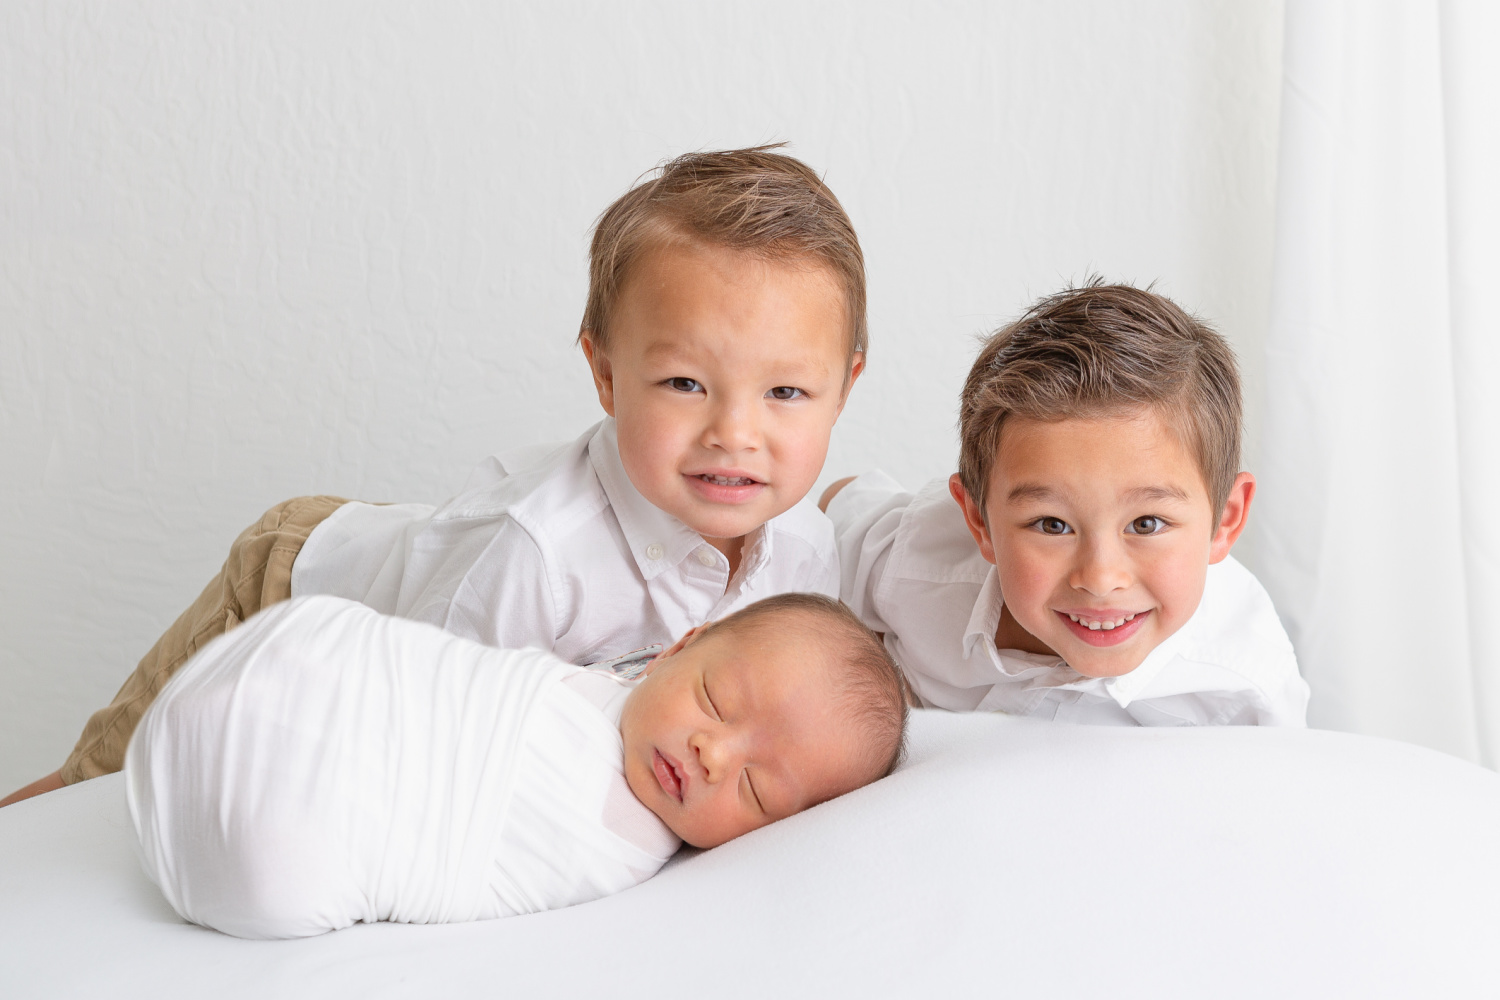 newborn baby boy wrapped in white with his two brothers behind him smiling